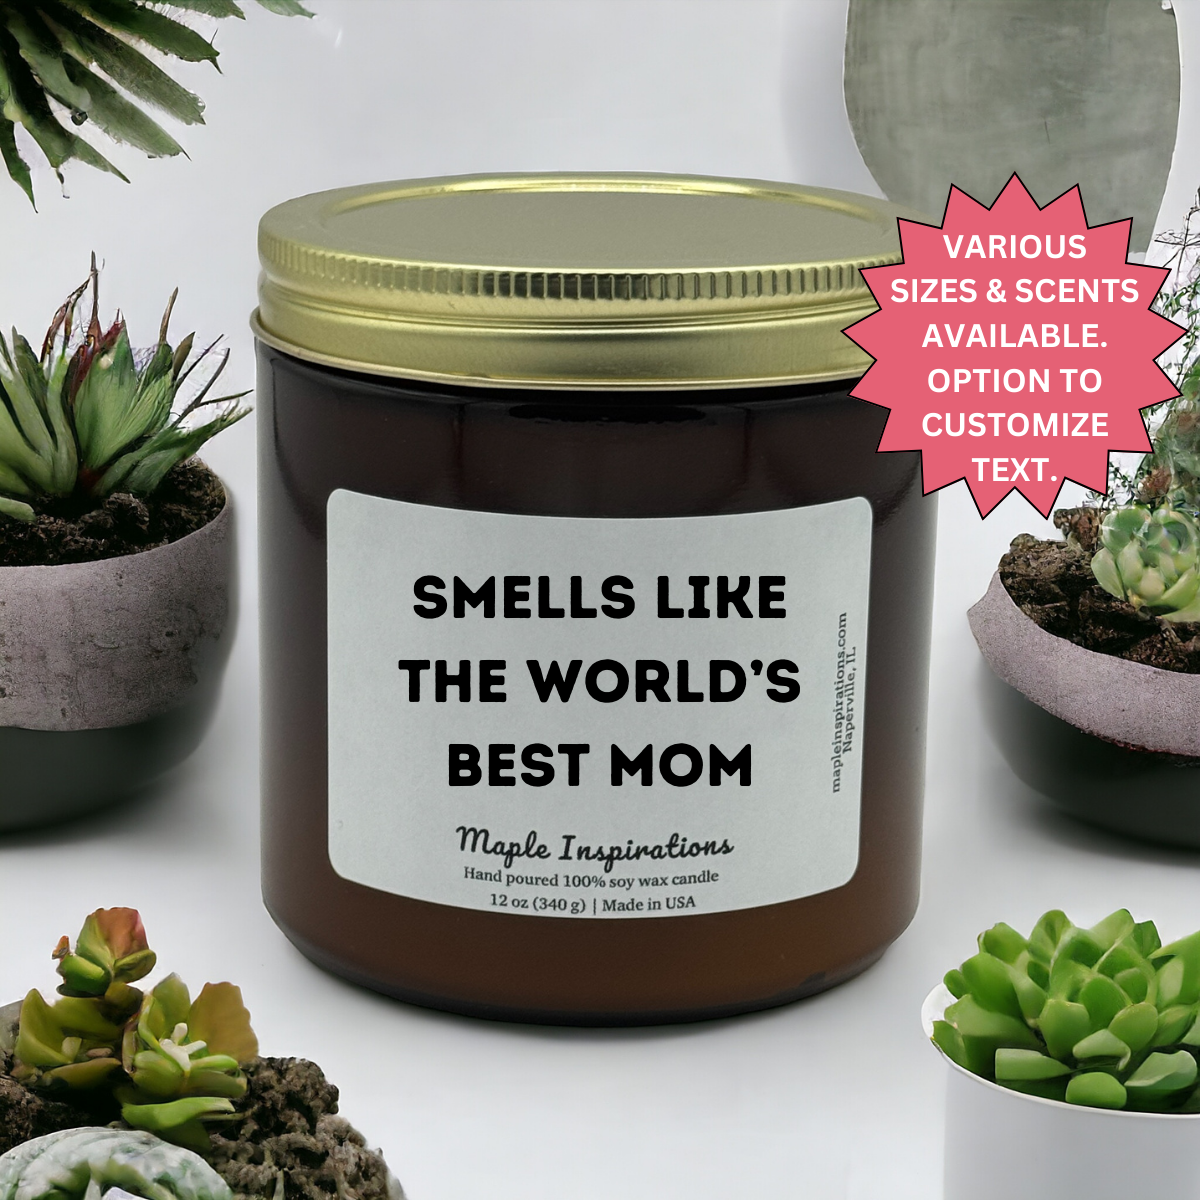 Mother's Day Gift, Personalized Gift Candle, Mom Gifts, Smells Like The World's Best Mom Scented Candle